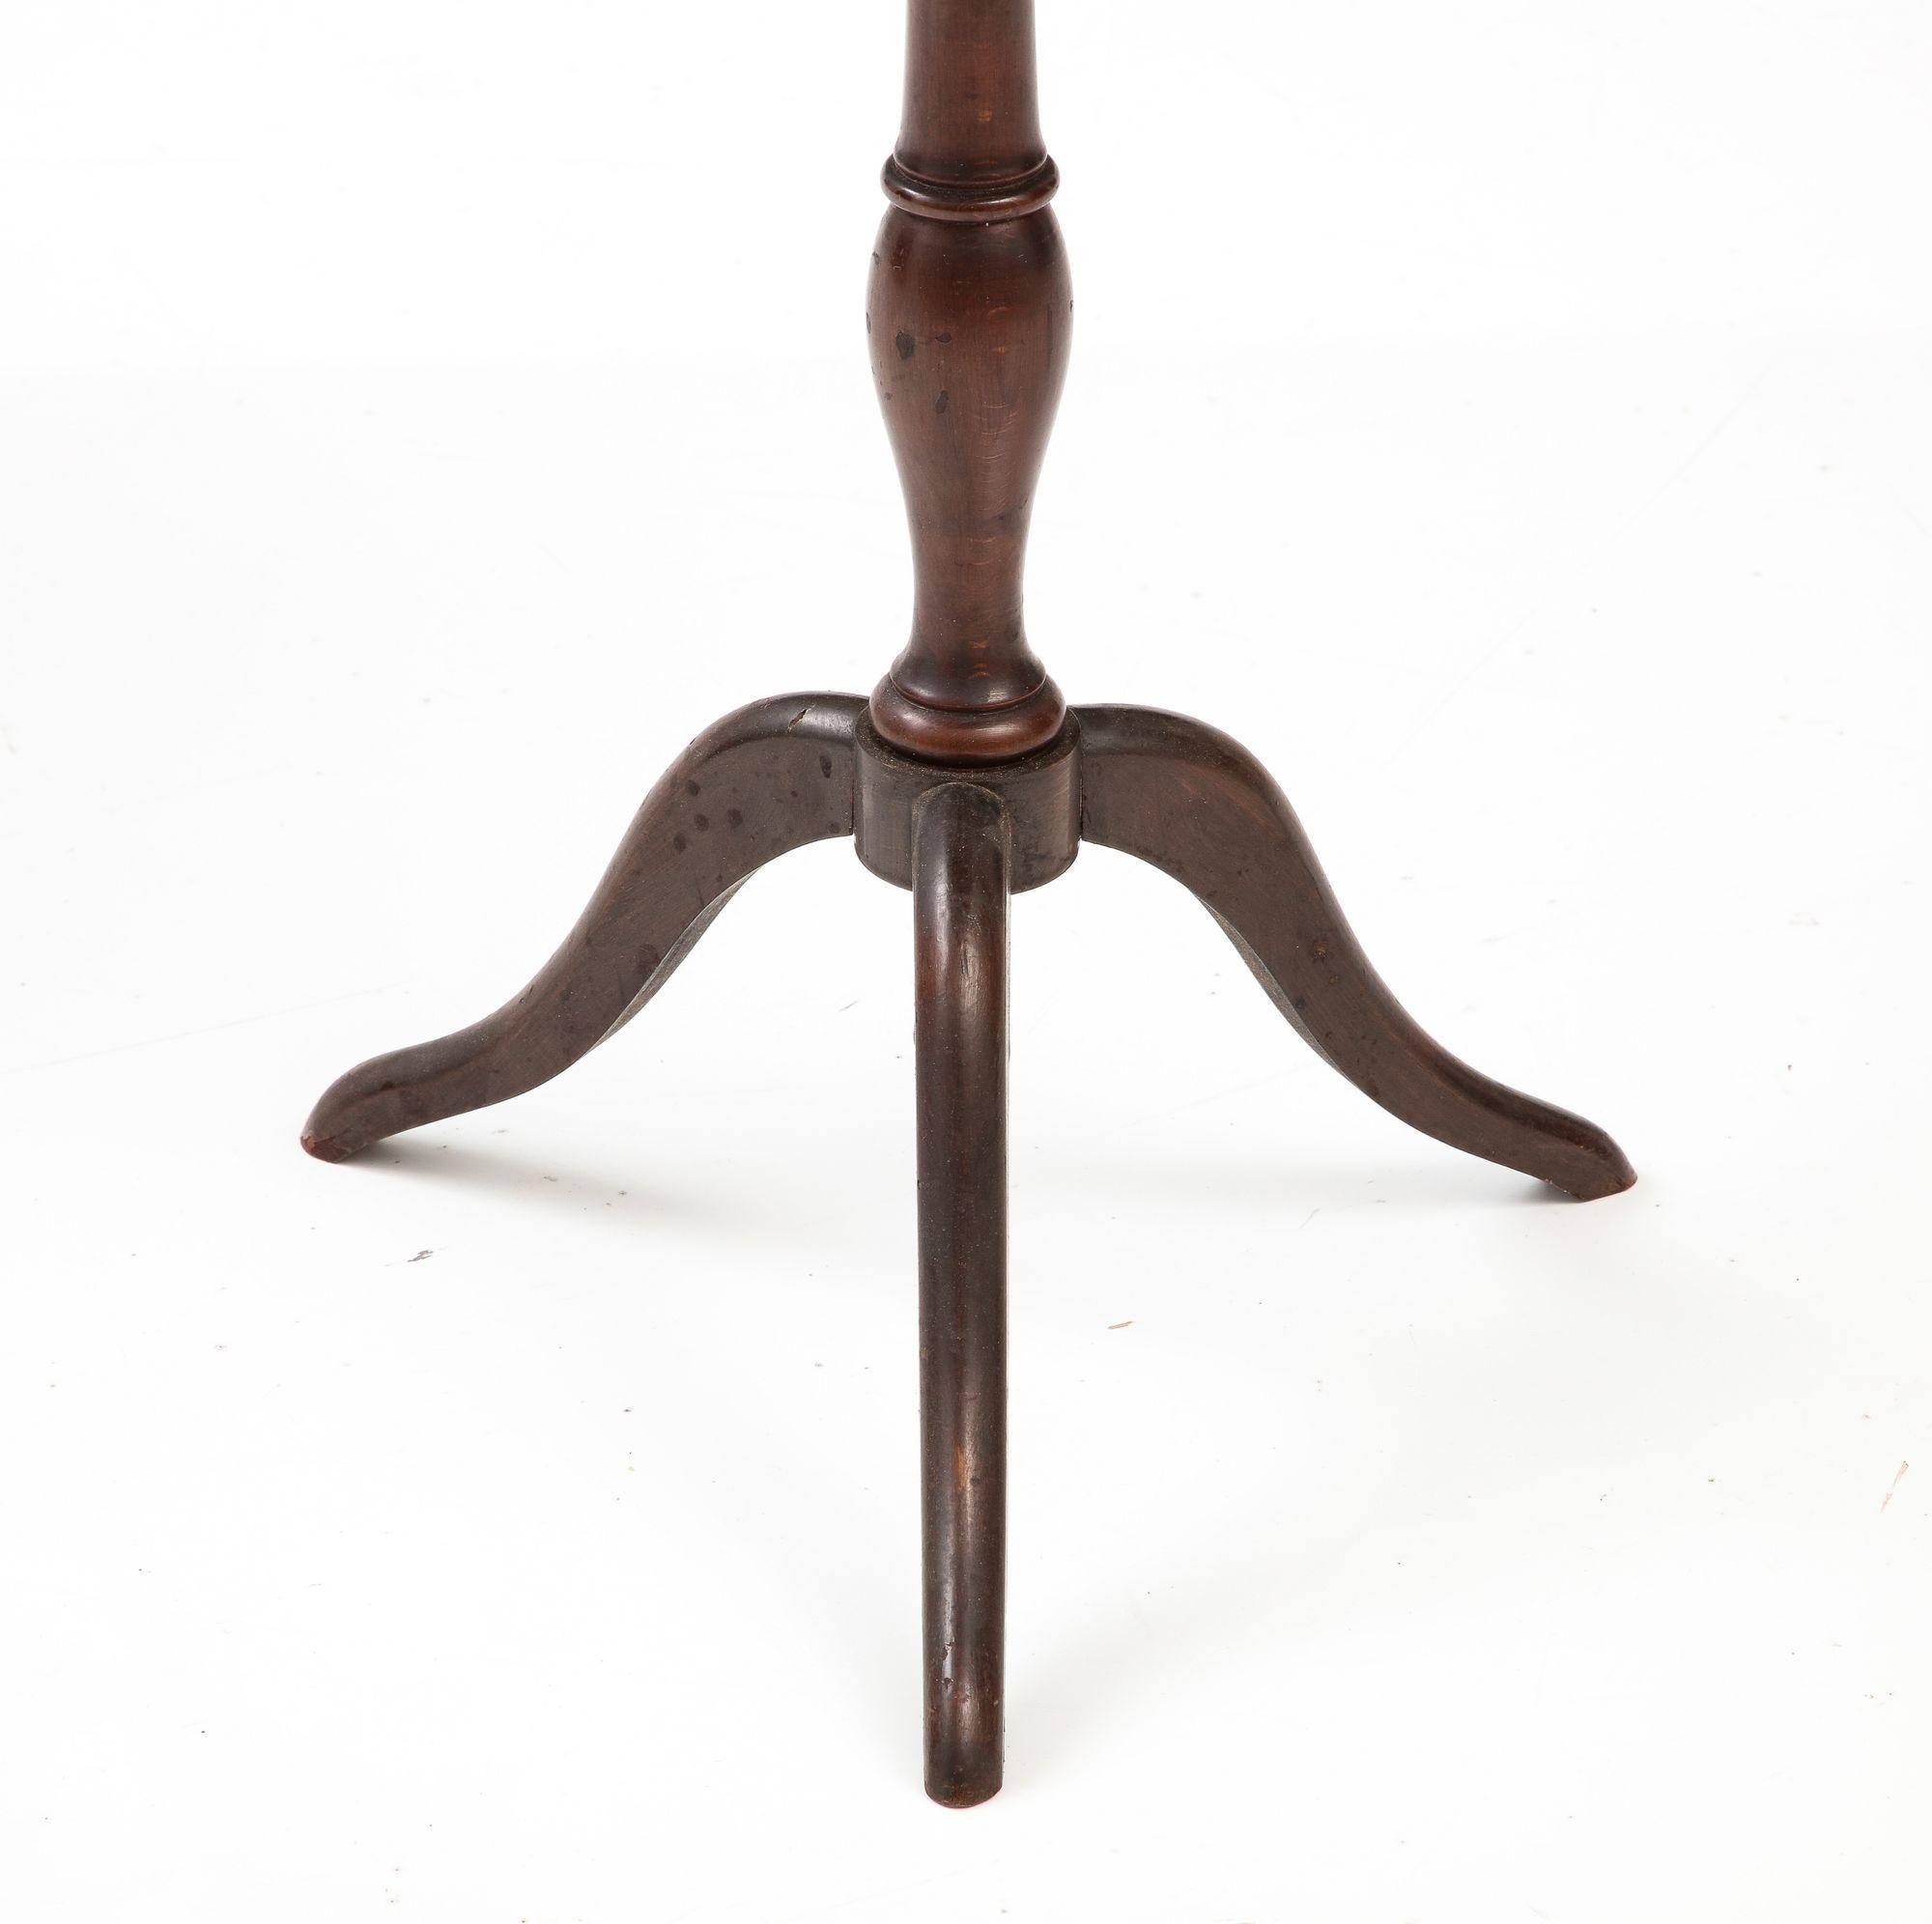 A small round French Gueridon side table from the 1940s. The mahogany veneer round top circled with a bronze edge. Wear consistent with age and use.